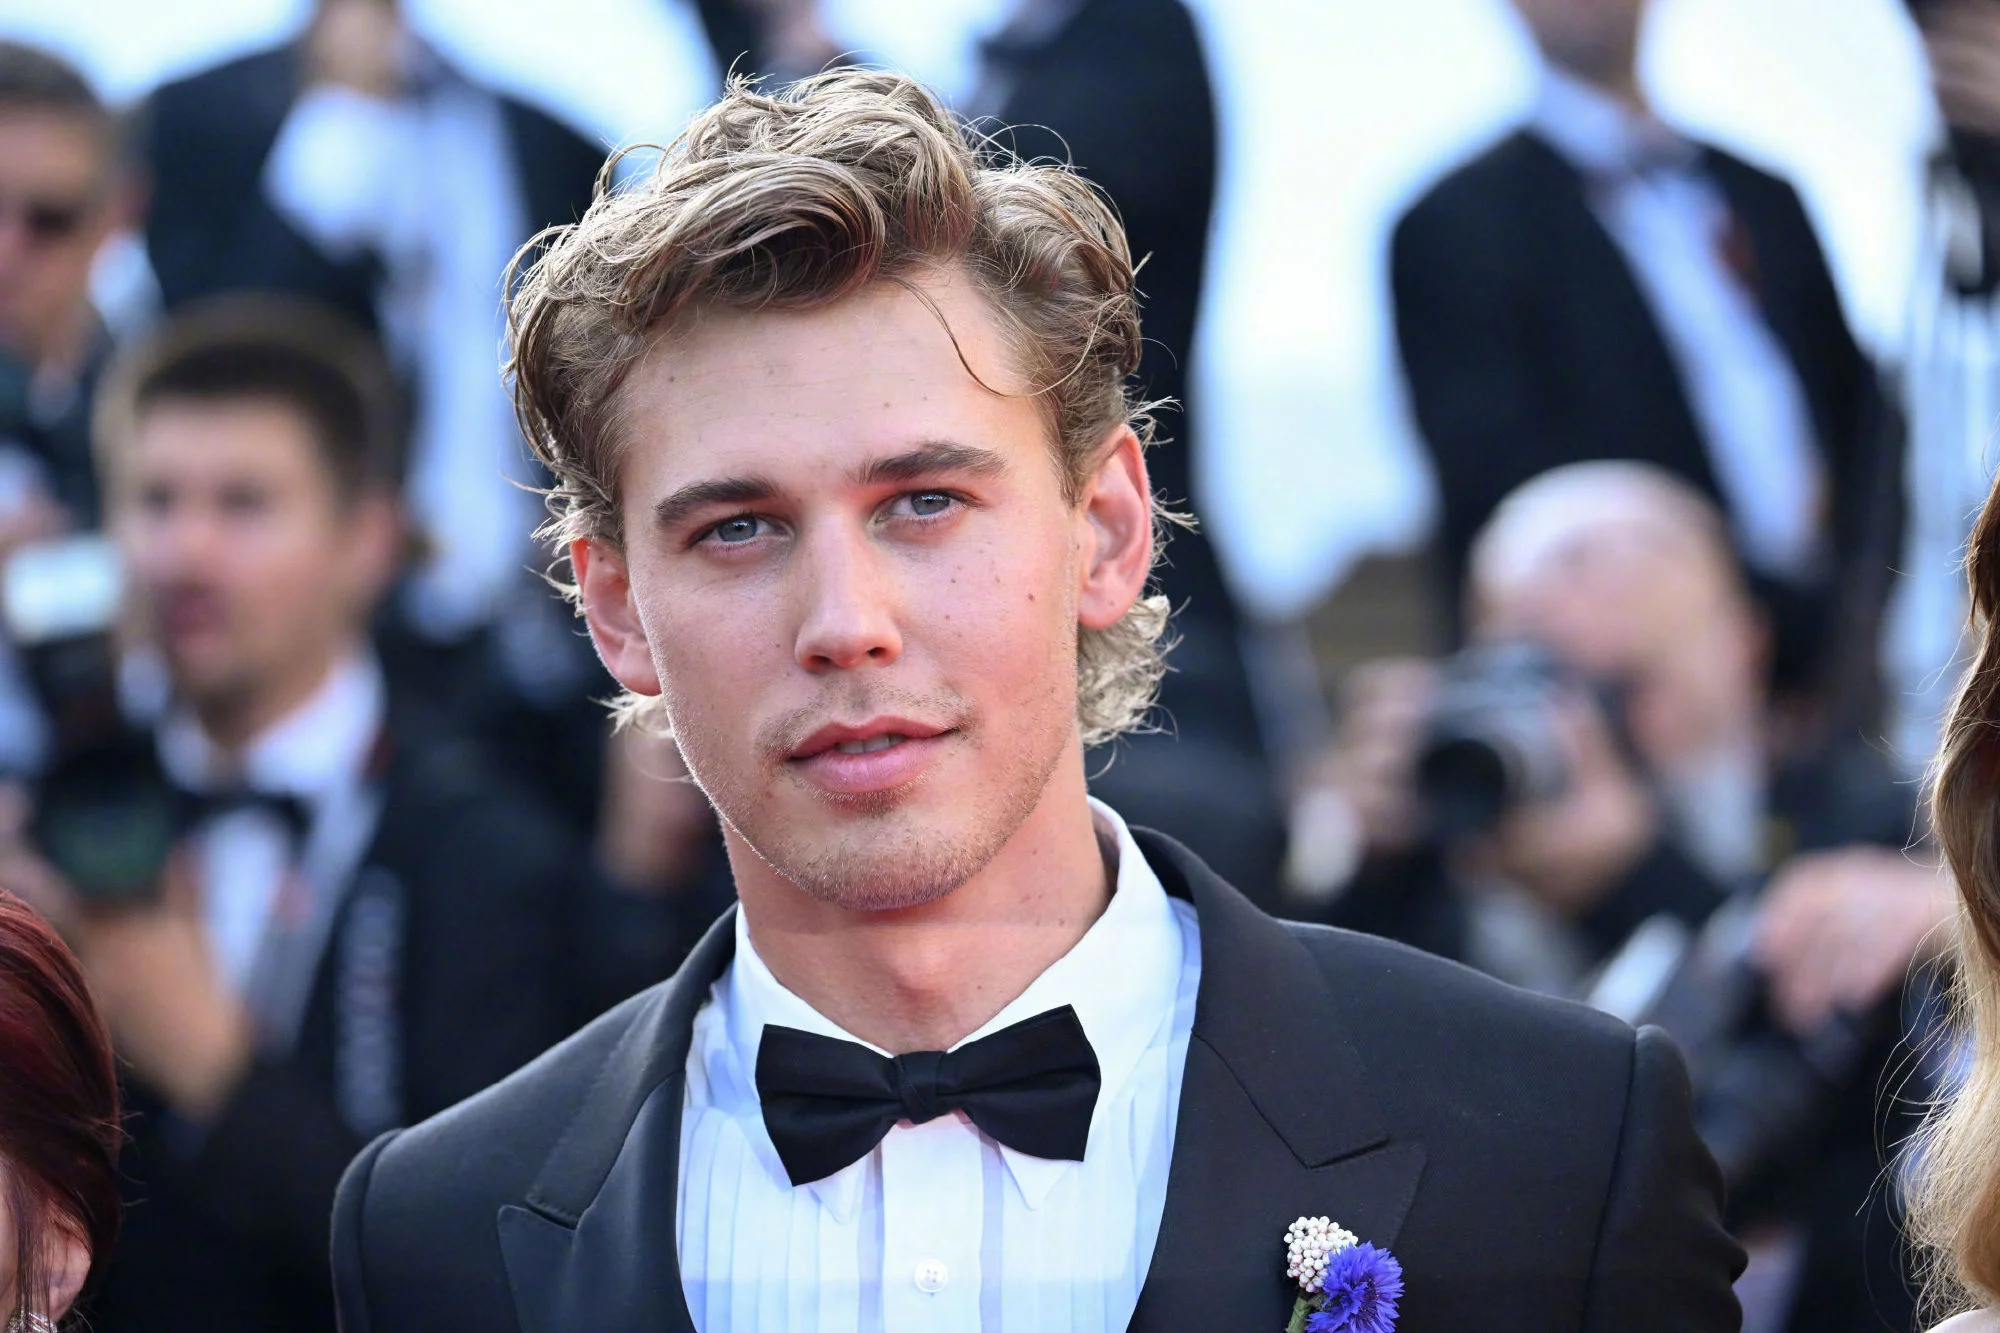 Austin Butler appears on the red carpet at the Cannes premiere of "Elvis"